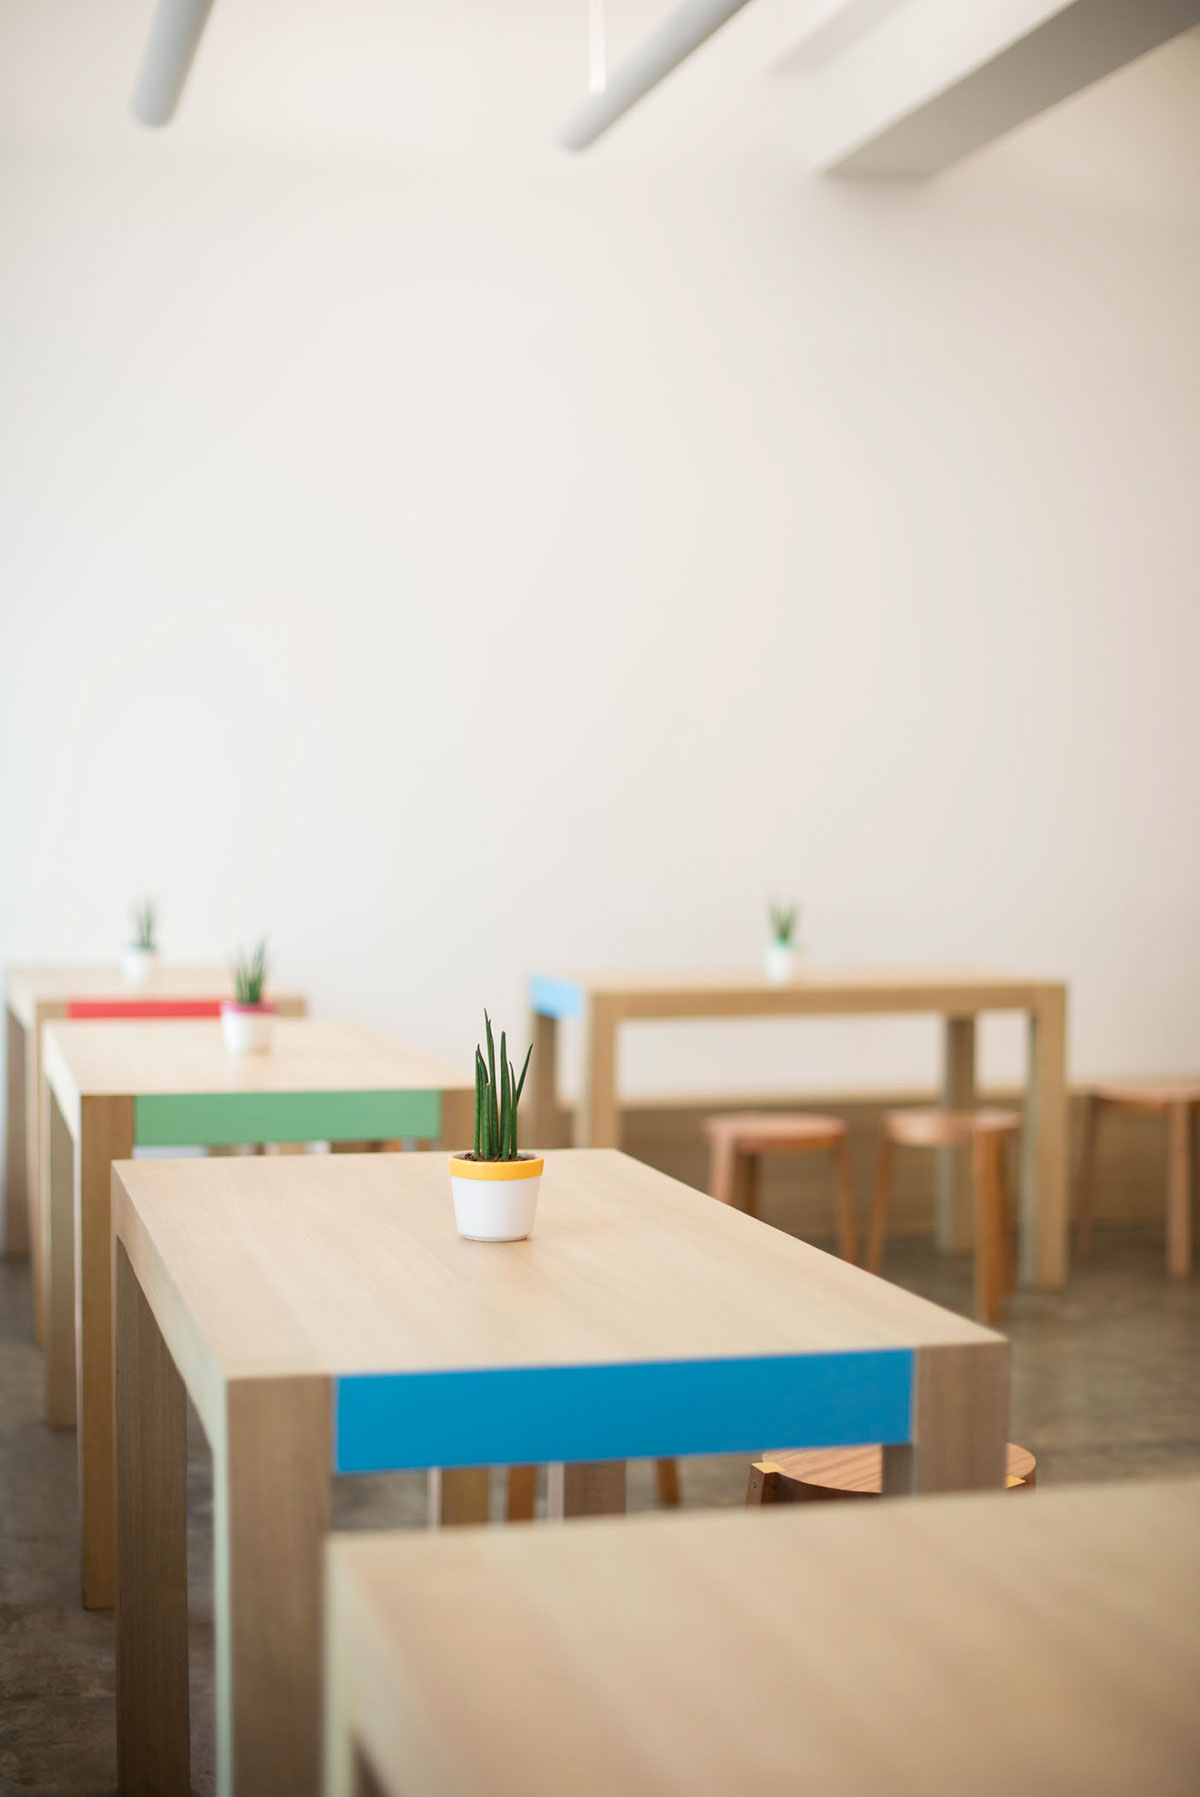 Coffee colours colors Manila philippines cafe Playful happy Workshop simple clean wood stools menu furniture